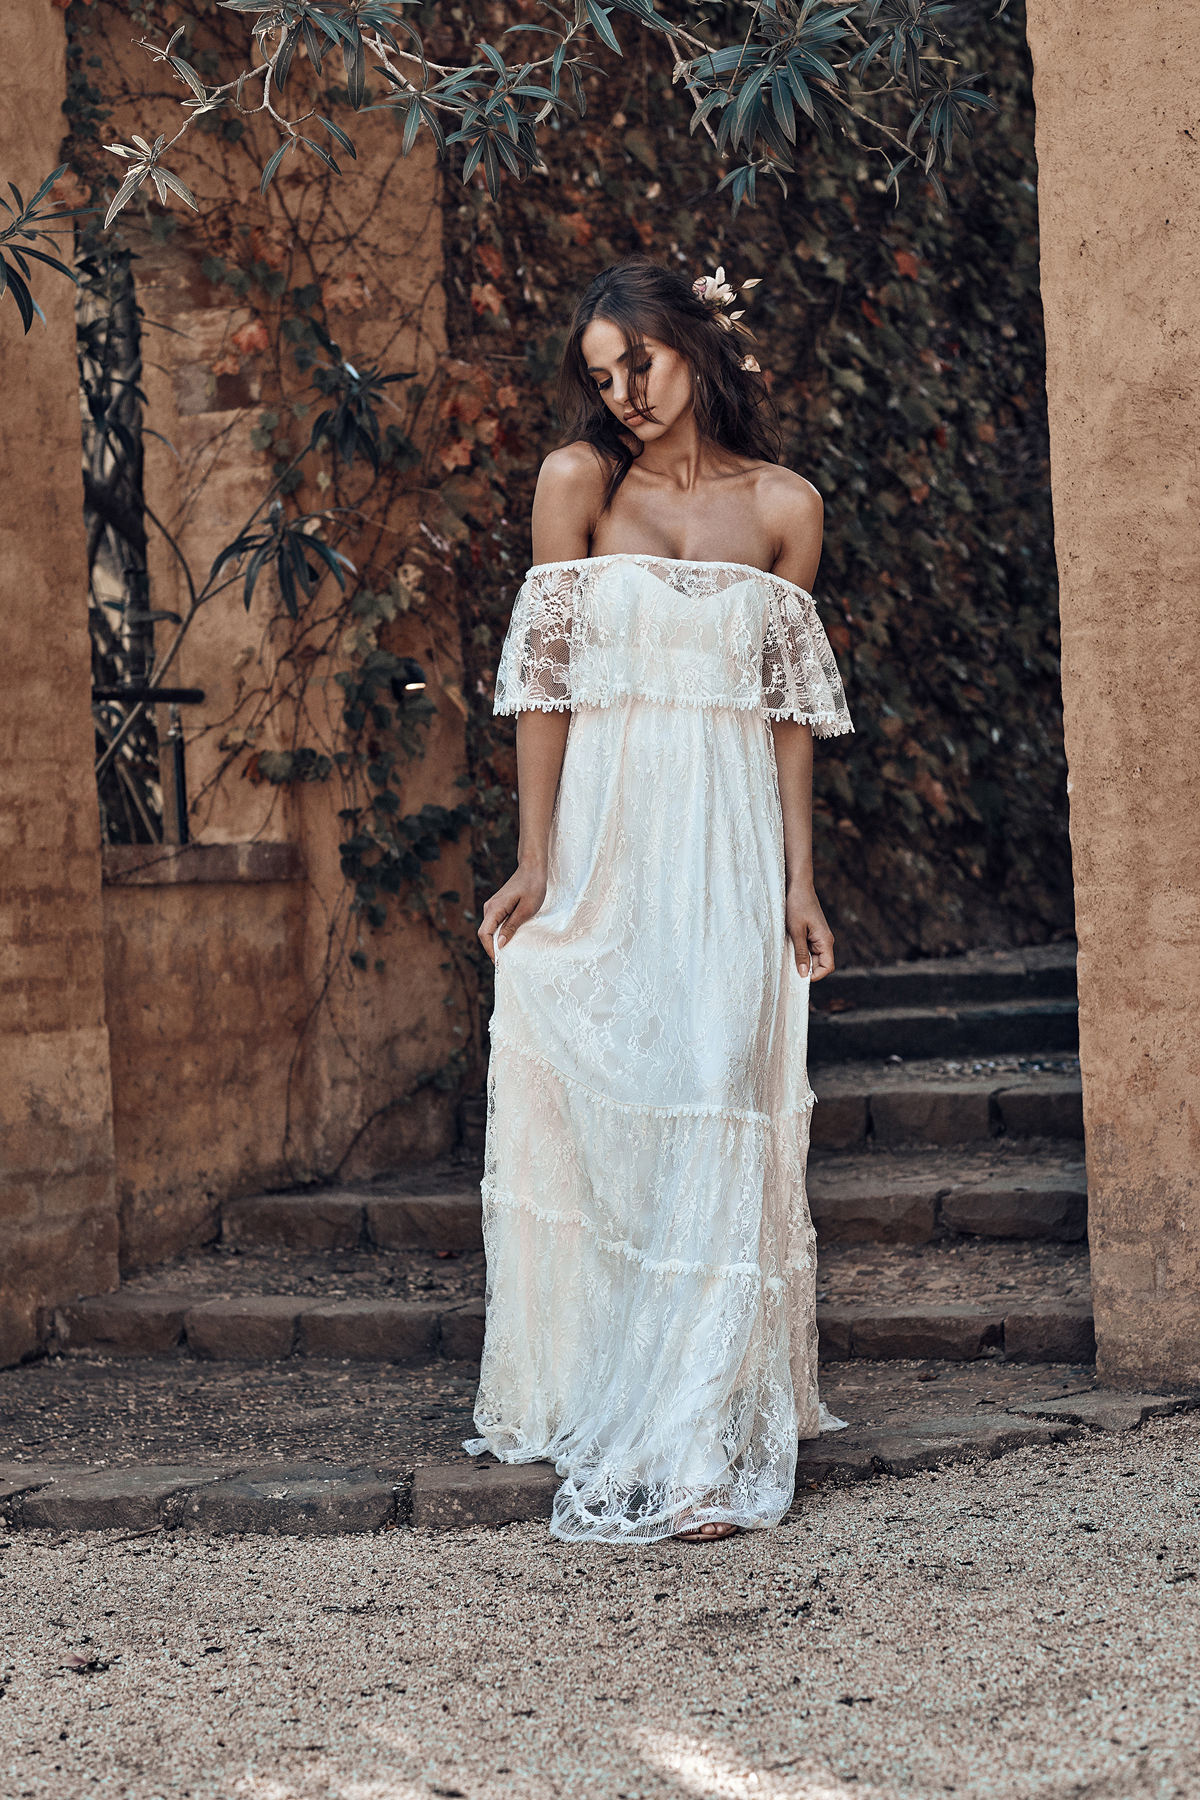 The Franca gown